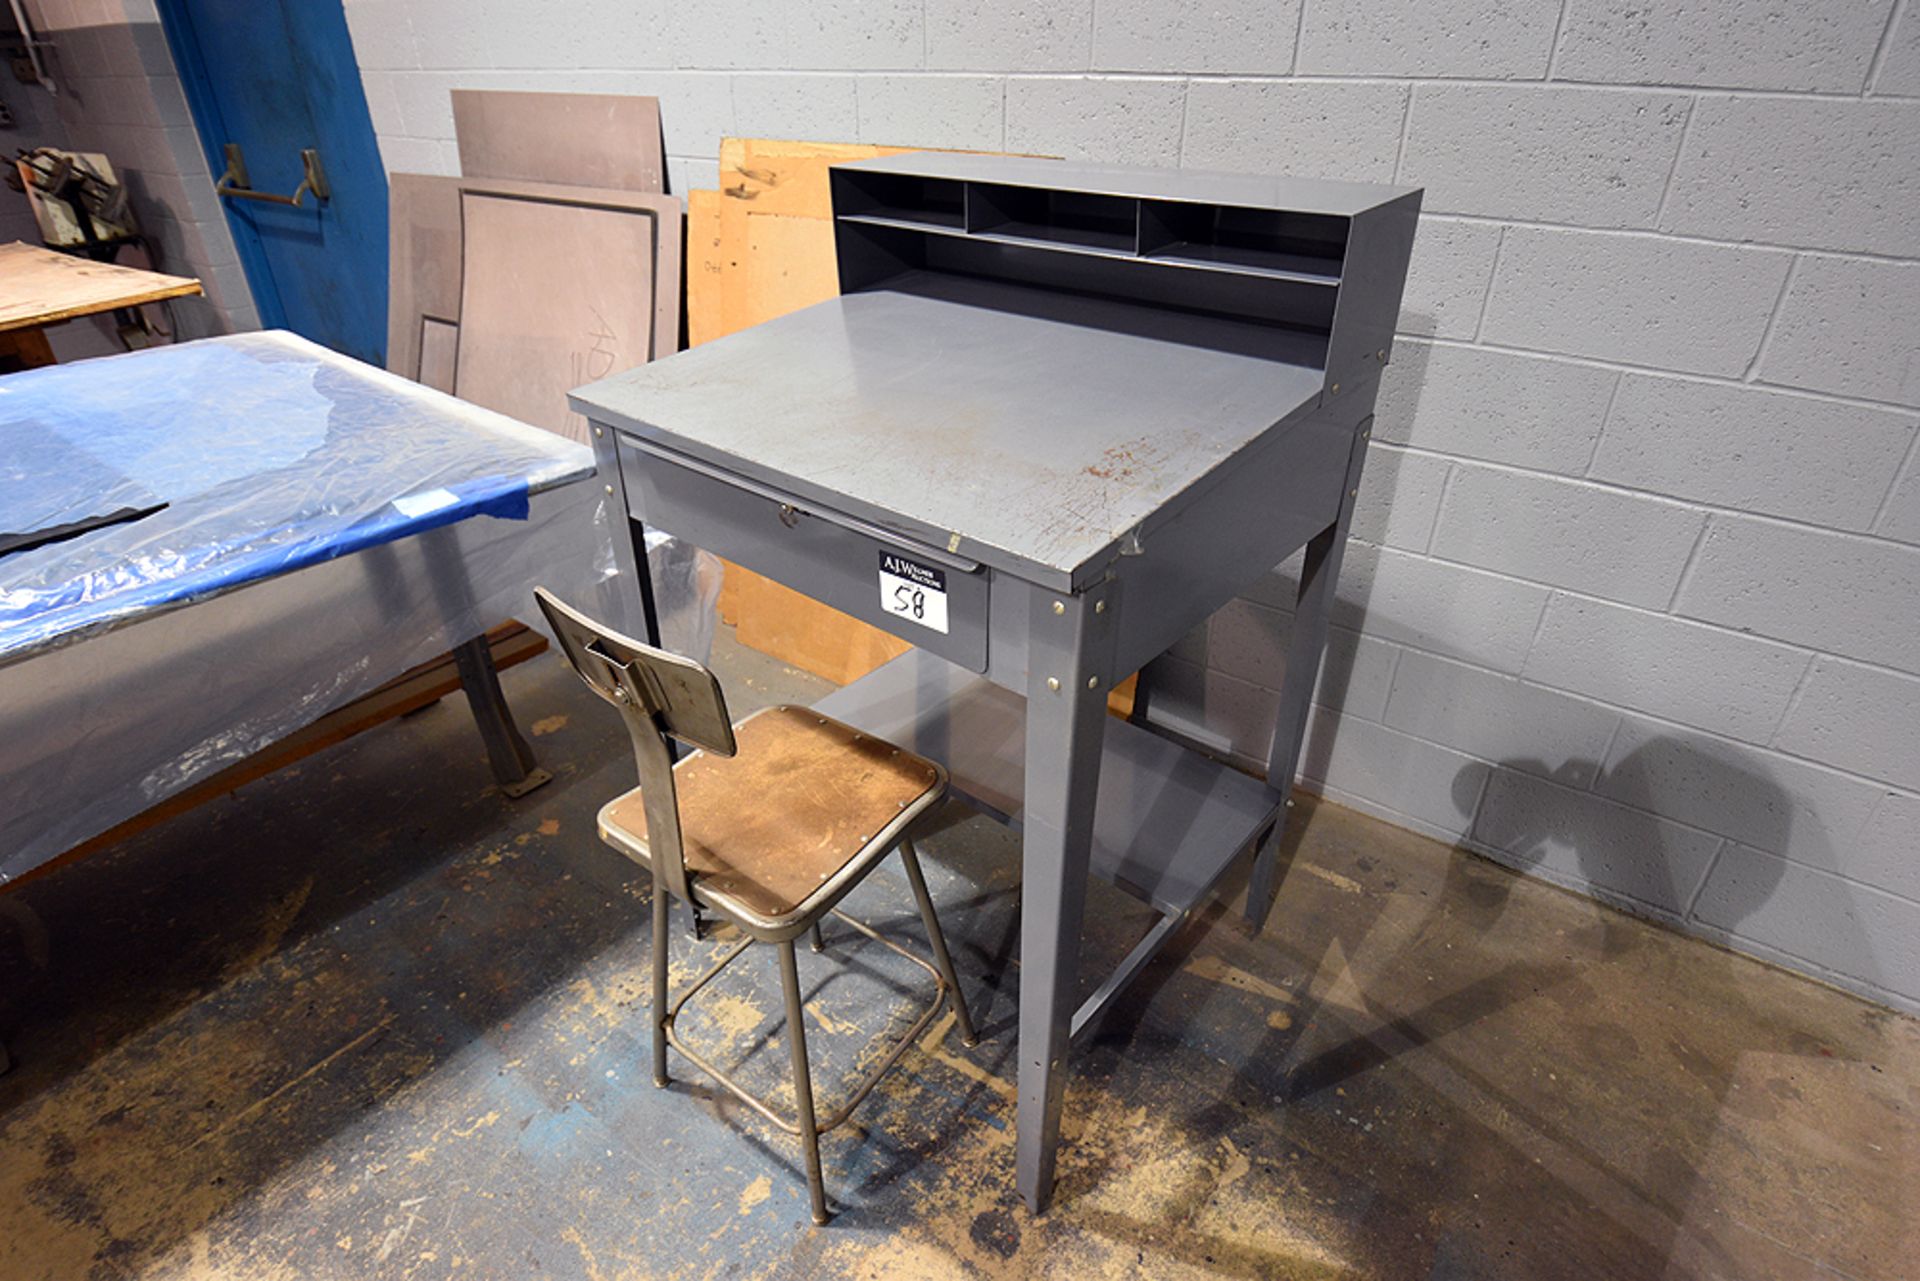 Forman's Desk & Work Benches